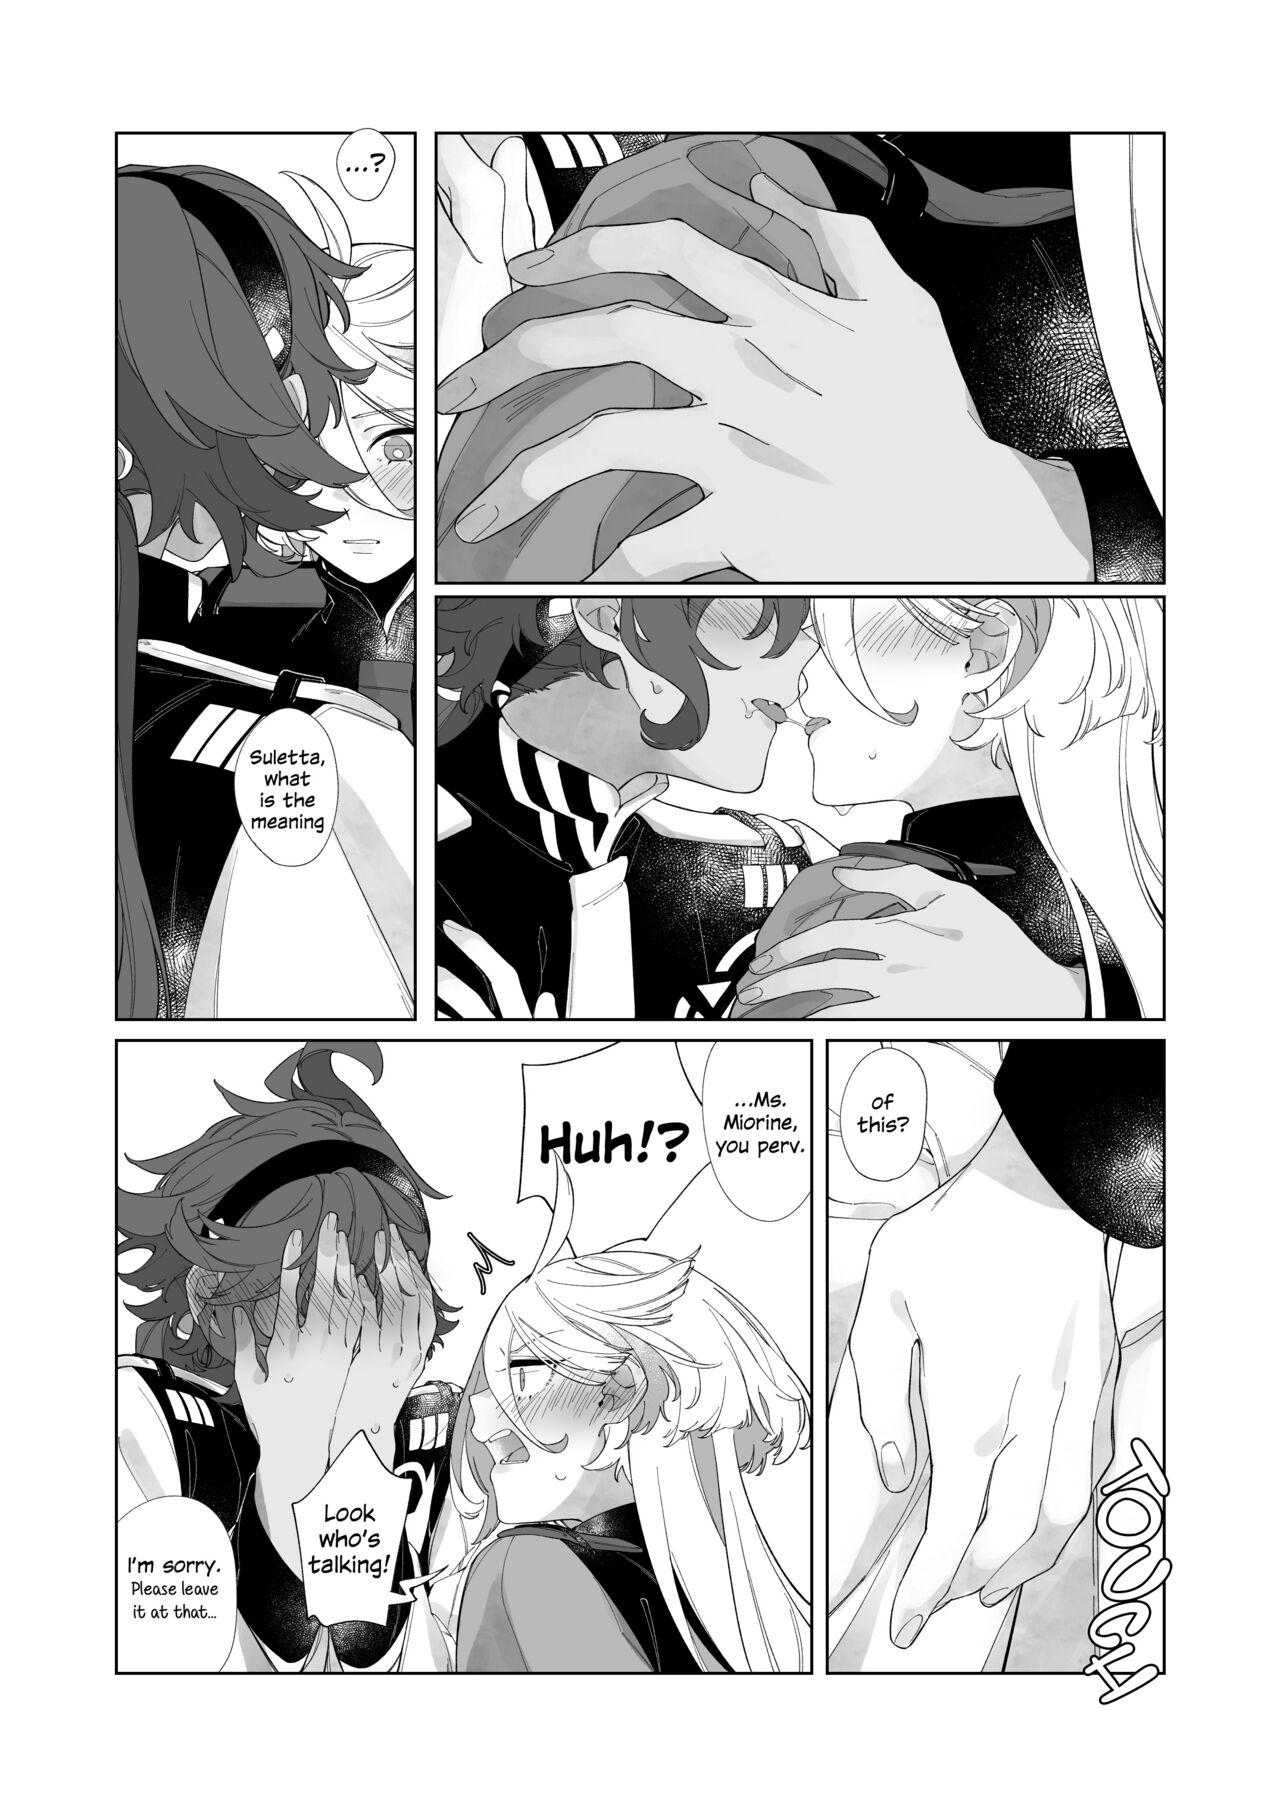 Hardcore Gay Kiss no Ato Nani ga Shitai? | After Kissing, What Else Do You Want to Do? - Mobile suit gundam the witch from mercury HD - Page 12